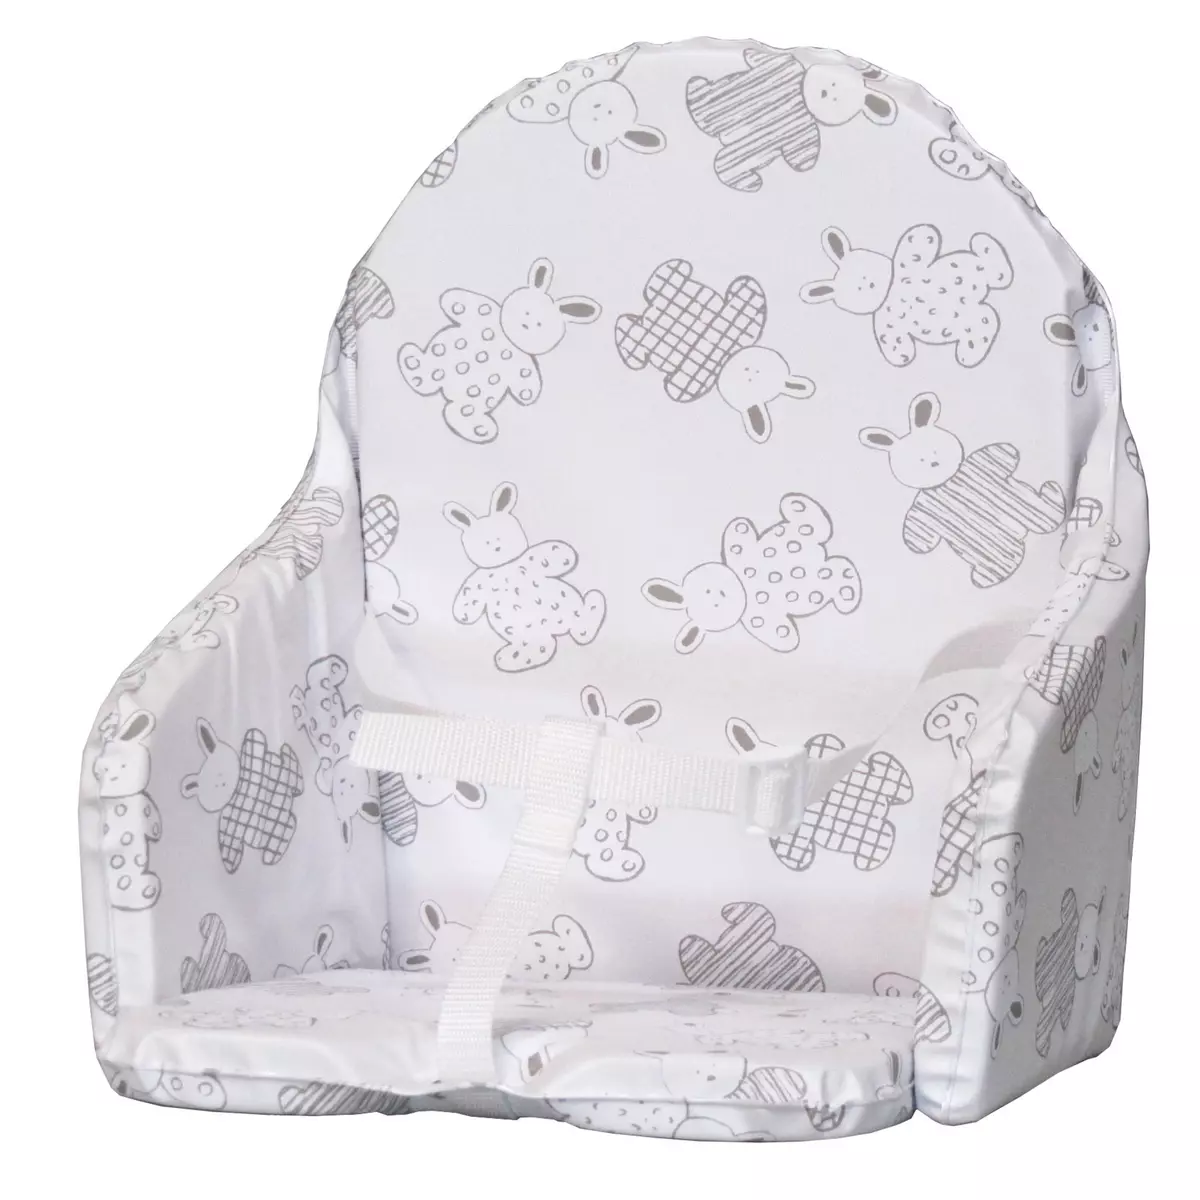 BAMBISOL Coussin de chaise Lapin